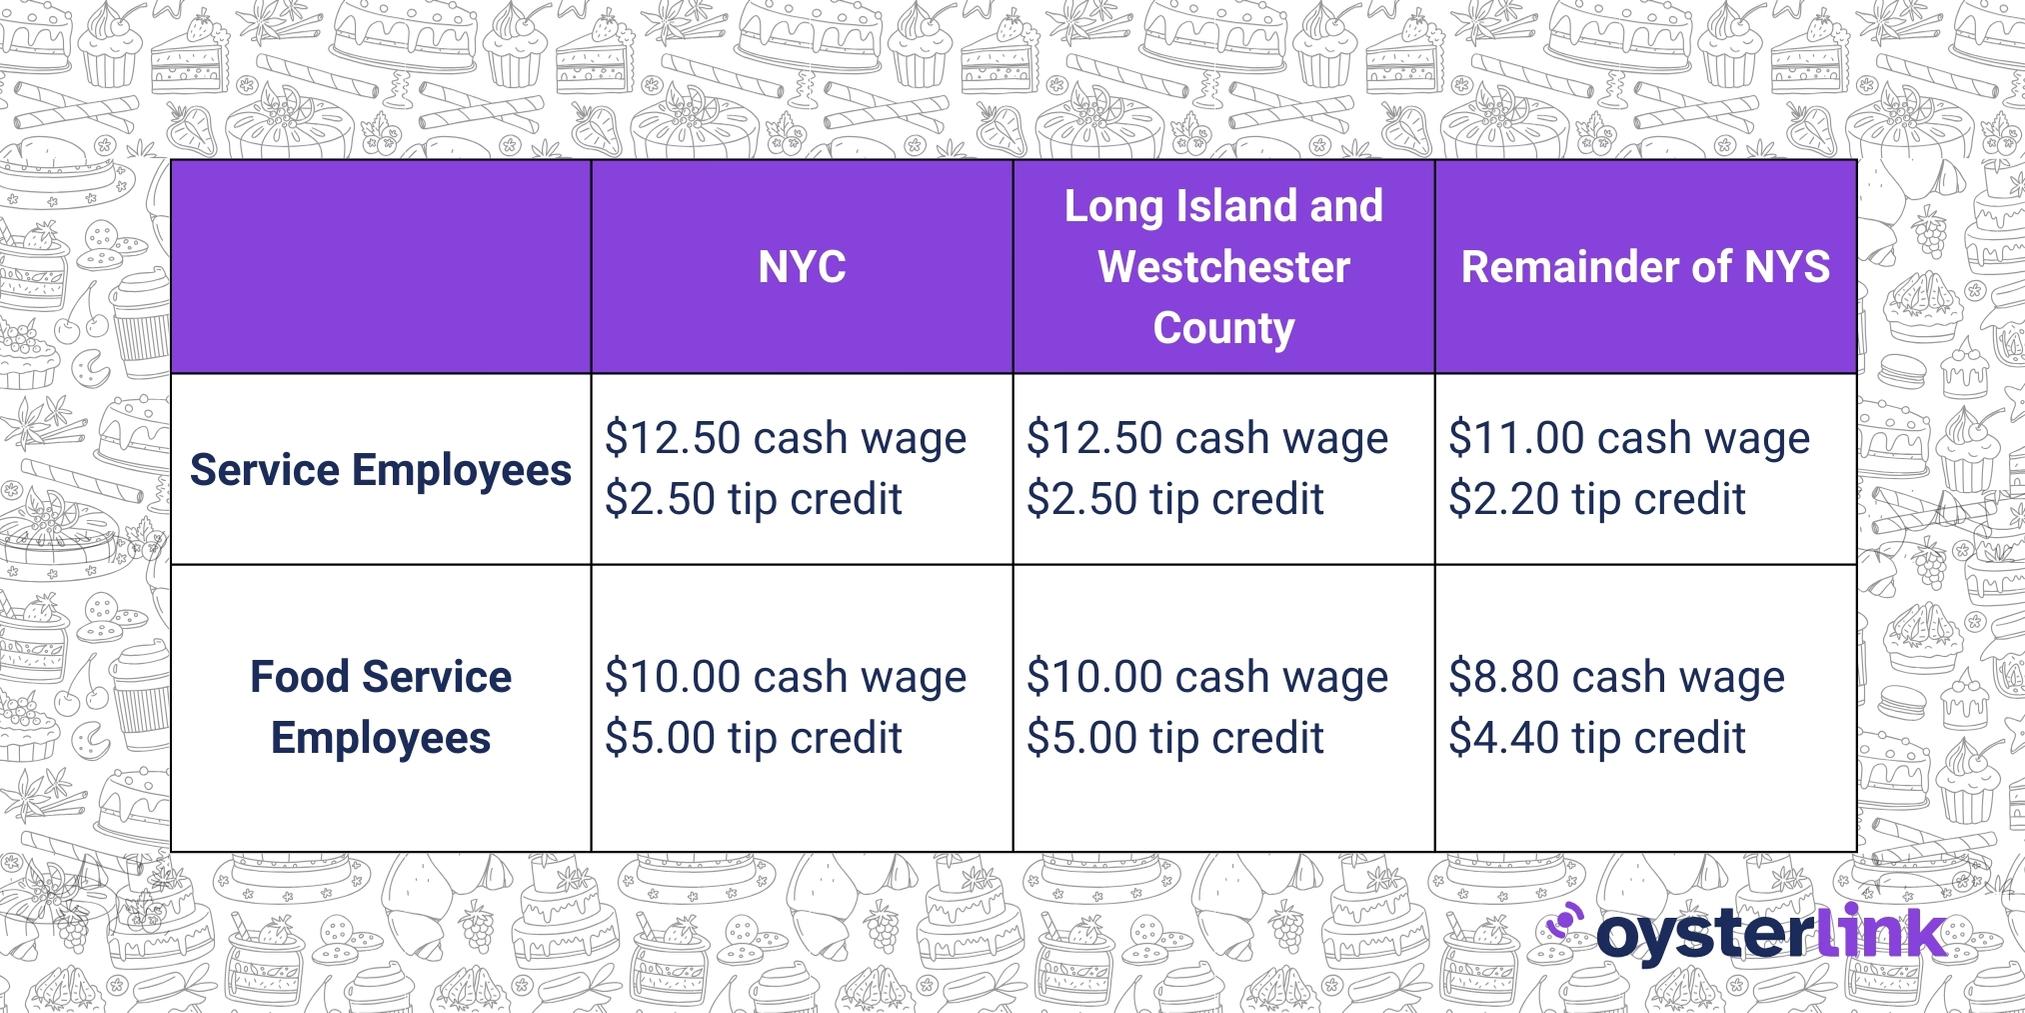 A graph showing cash wages and tip credits for two kinds of employees in New York as per New York's Department of Labor